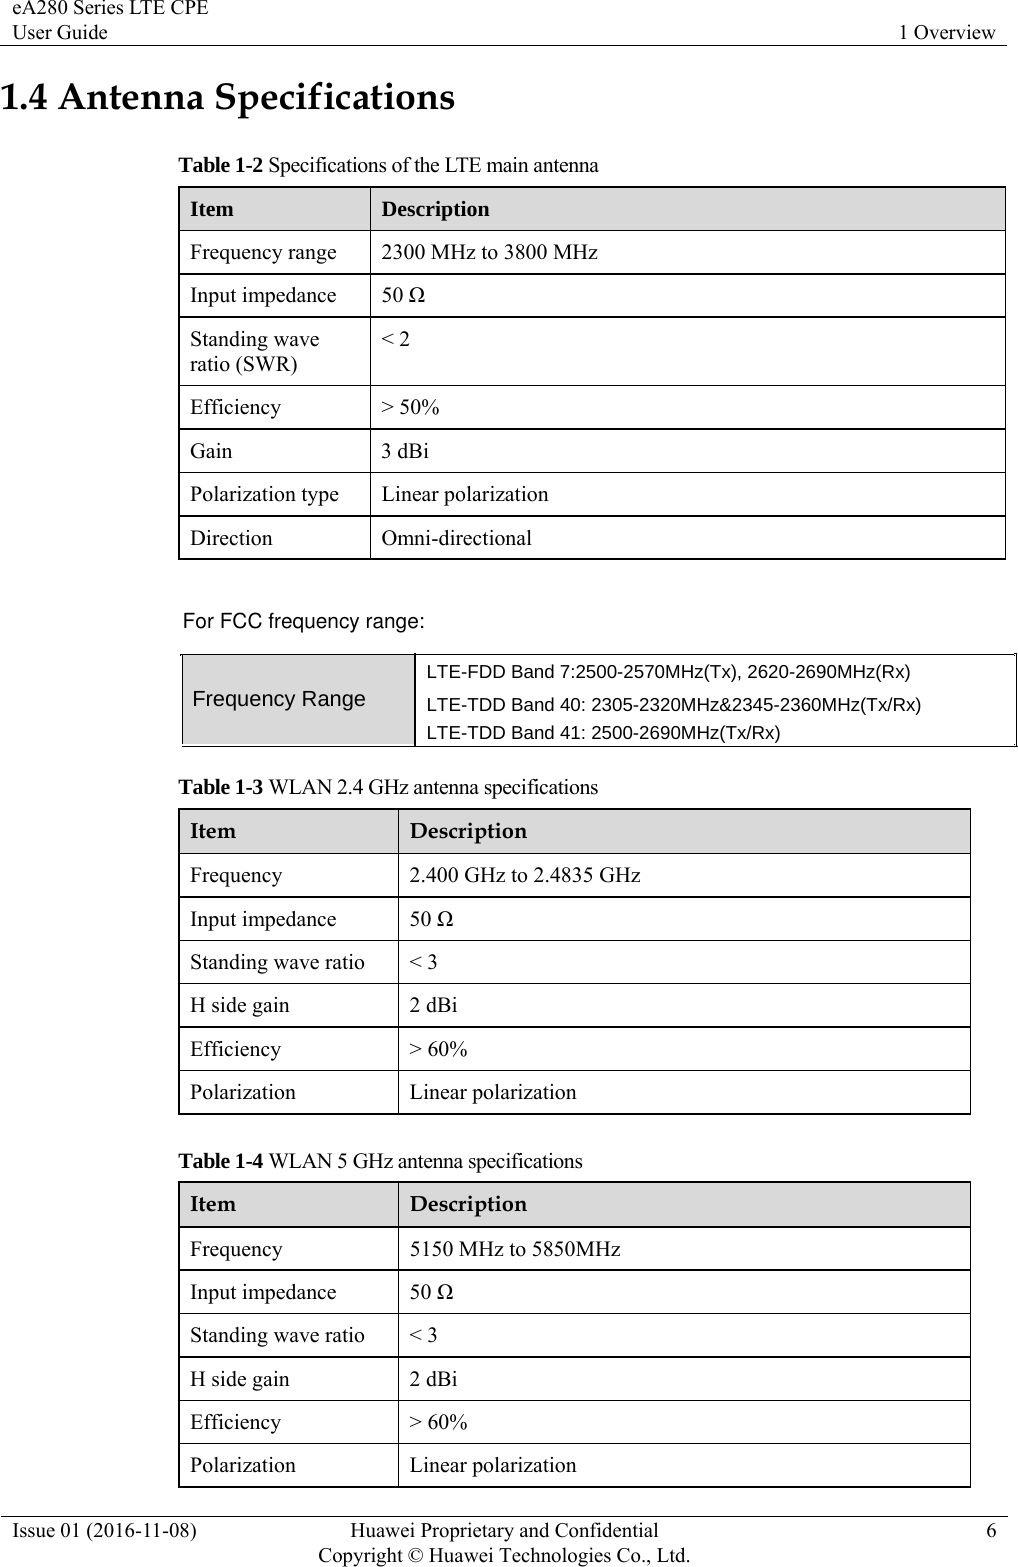 eA280 Series LTE CPE User Guide  1 Overview Issue 01 (2016-11-08)  Huawei Proprietary and Confidential         Copyright © Huawei Technologies Co., Ltd.6 1.4 Antenna Specifications Table 1-2 Specifications of the LTE main antenna Item  Description Frequency range  2300 MHz to 3800 MHz Input impedance  50 Ω Standing wave ratio (SWR) &lt; 2 Efficiency &gt; 50% Gain                           3 dBiPolarization type  Linear polarization Direction Omni-directional Table 1-3 WLAN 2.4 GHz antenna specifications Item Description Frequency  2.400 GHz to 2.4835 GHz Input impedance  50 Ω Standing wave ratio  &lt; 3 H side gain  2 dBi Efficiency &gt; 60% Polarization Linear polarization Table 1-4 WLAN 5 GHz antenna specifications Item Description Frequency  5150 MHz to 5850MHz Input impedance  50 Ω Standing wave ratio  &lt; 3 H side gain  2 dBi Efficiency &gt; 60% Polarization Linear polarization    Frequency Range LTE-FDD Band 7:2500-2570MHz(Tx), 2620-2690MHz(Rx) LTE-TDD Band 40: 2305-2320MHz&amp;2345-2360MHz(Tx/Rx) LTE-TDD Band 41: 2500-2690MHz(Tx/Rx)   For FCC frequency range: